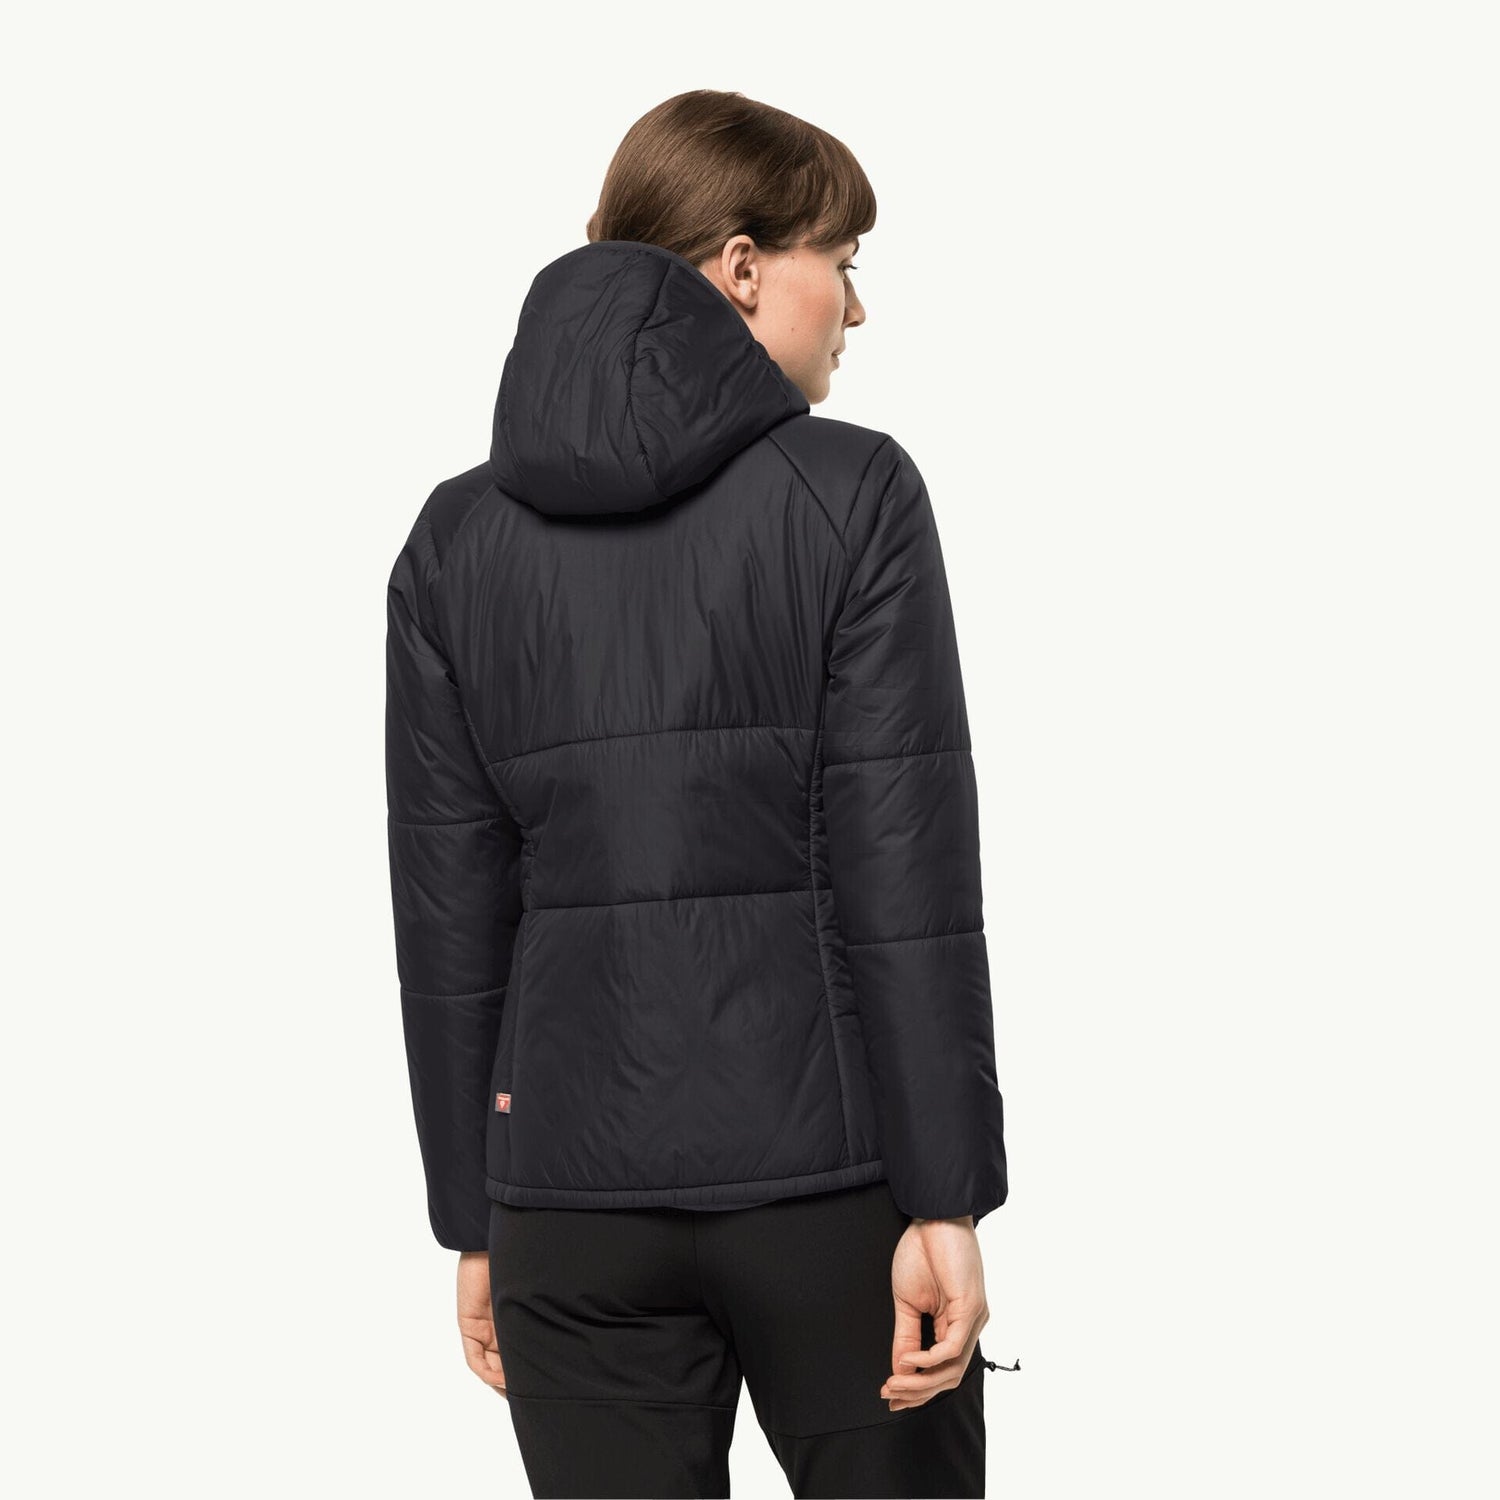 Jack Wolfskin W's Bergland Ins Hoody insulated jacket - Recycled materials Black Jacket